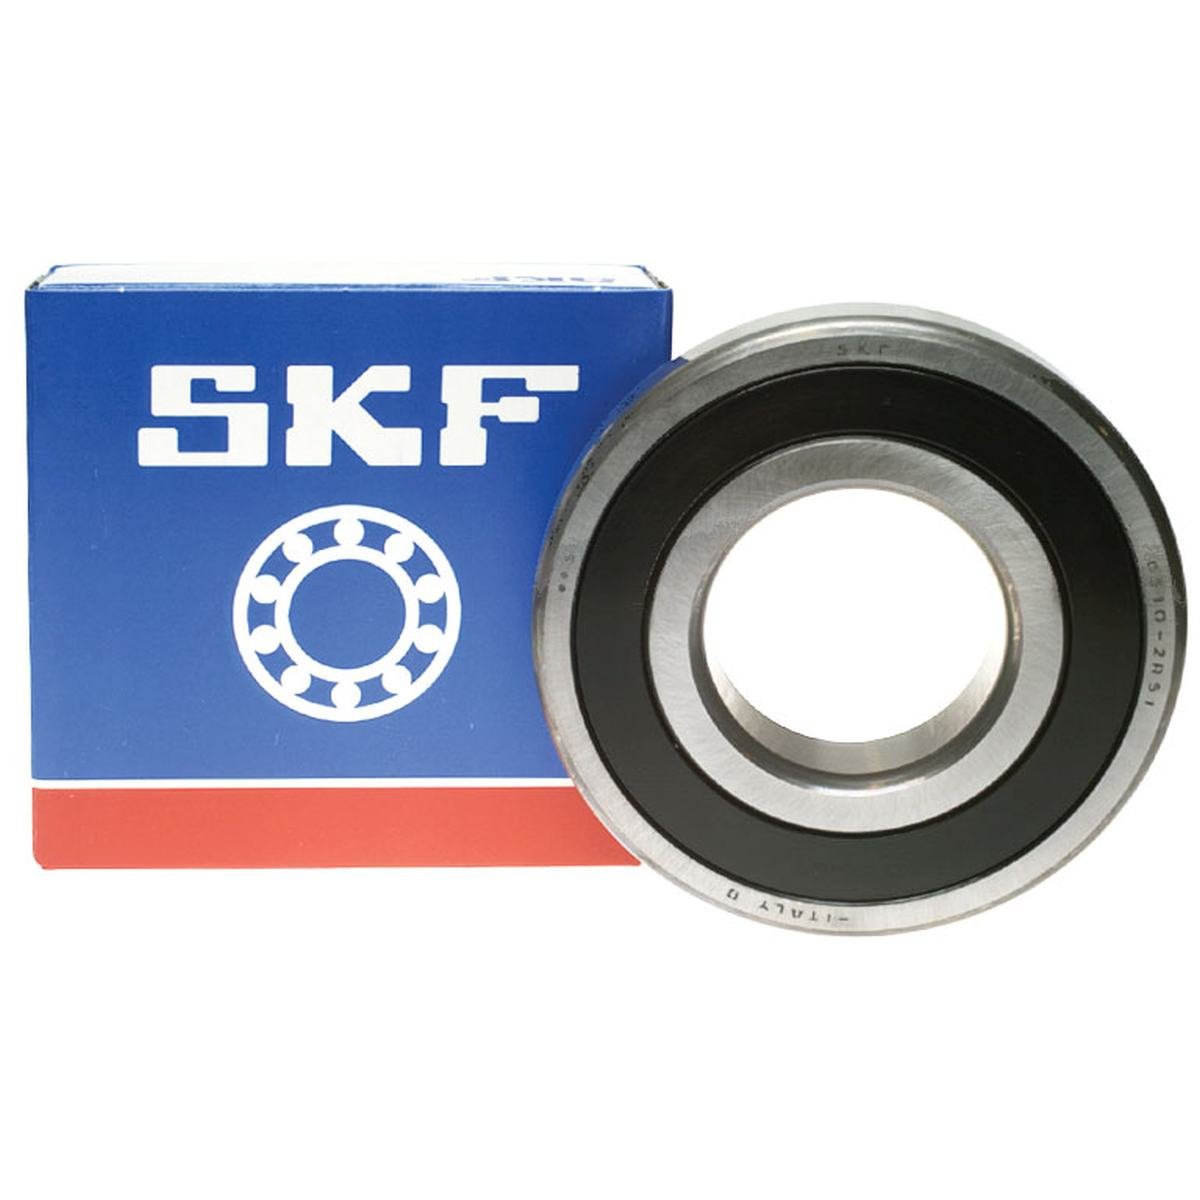 Kullager 626 2RS SKF 6 x 19 x 6 mm